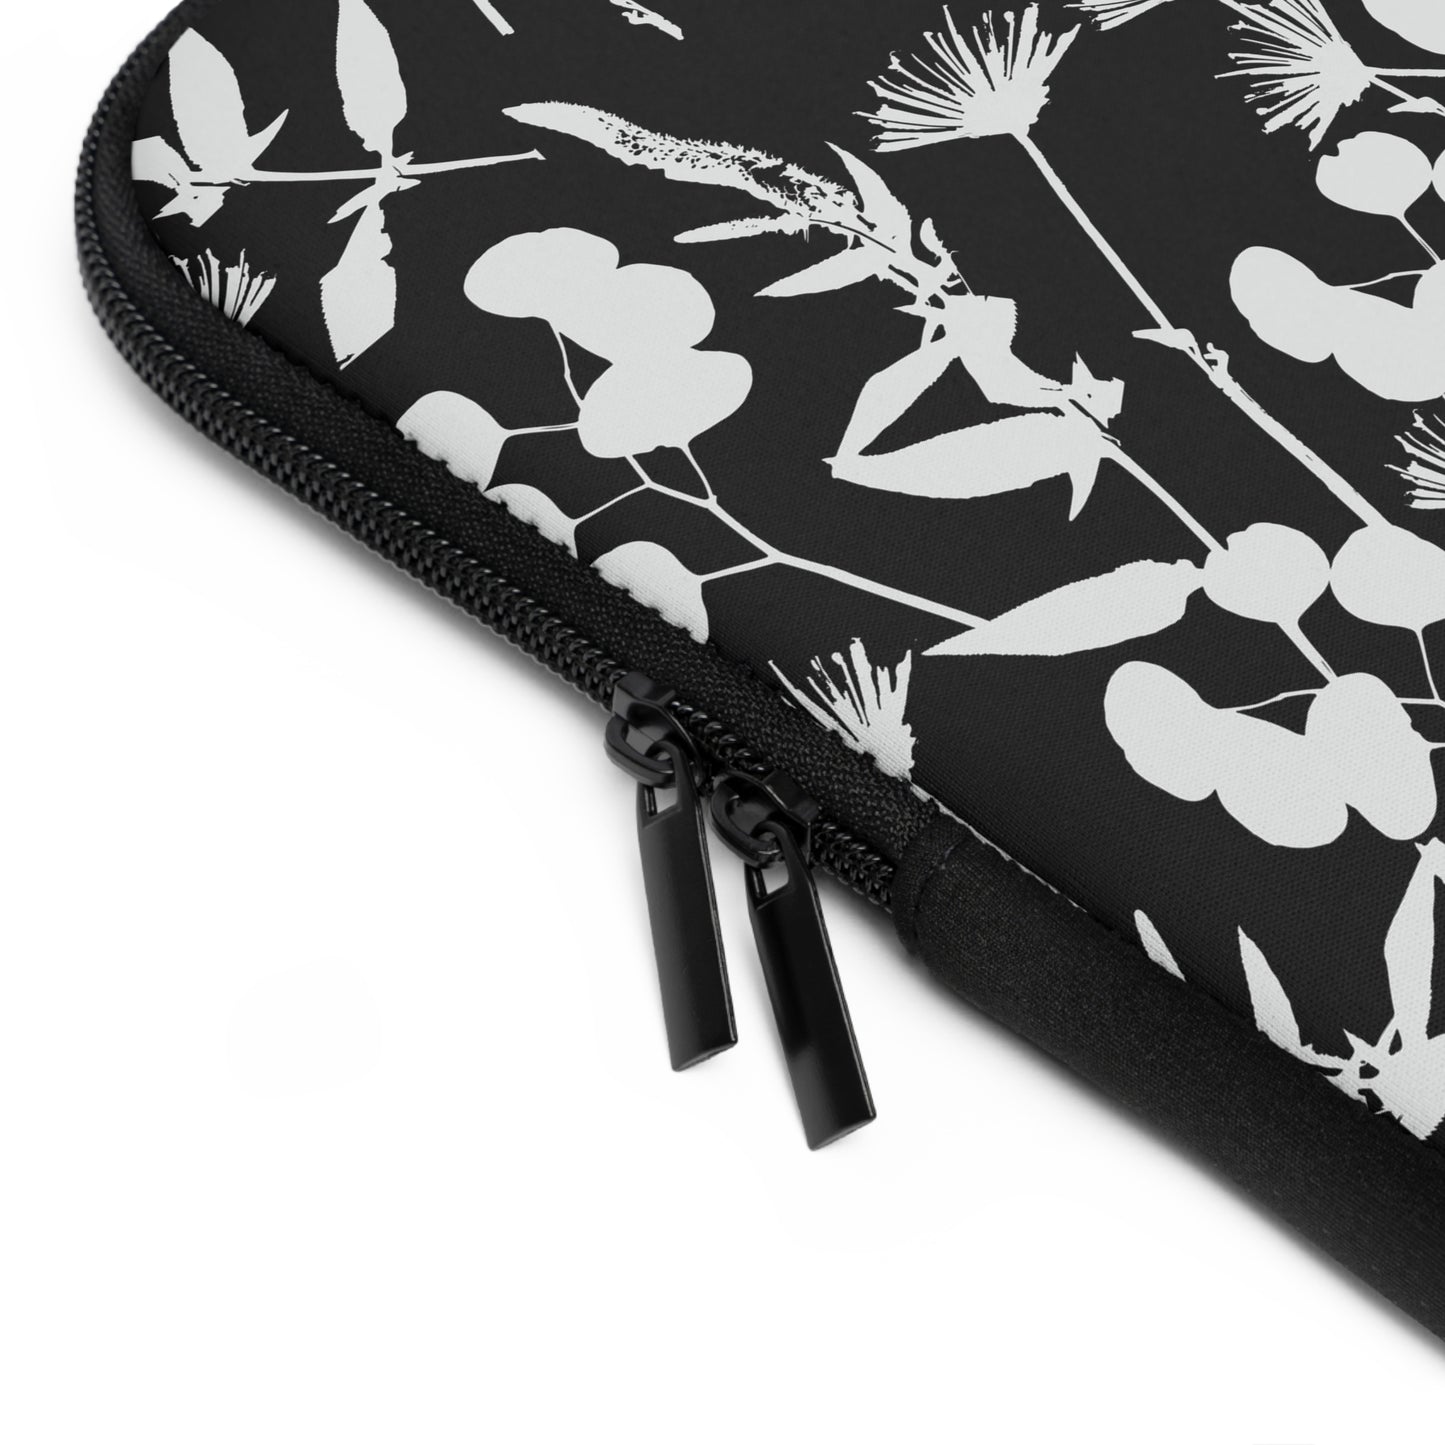 Black and White Floral Laptop Sleeve